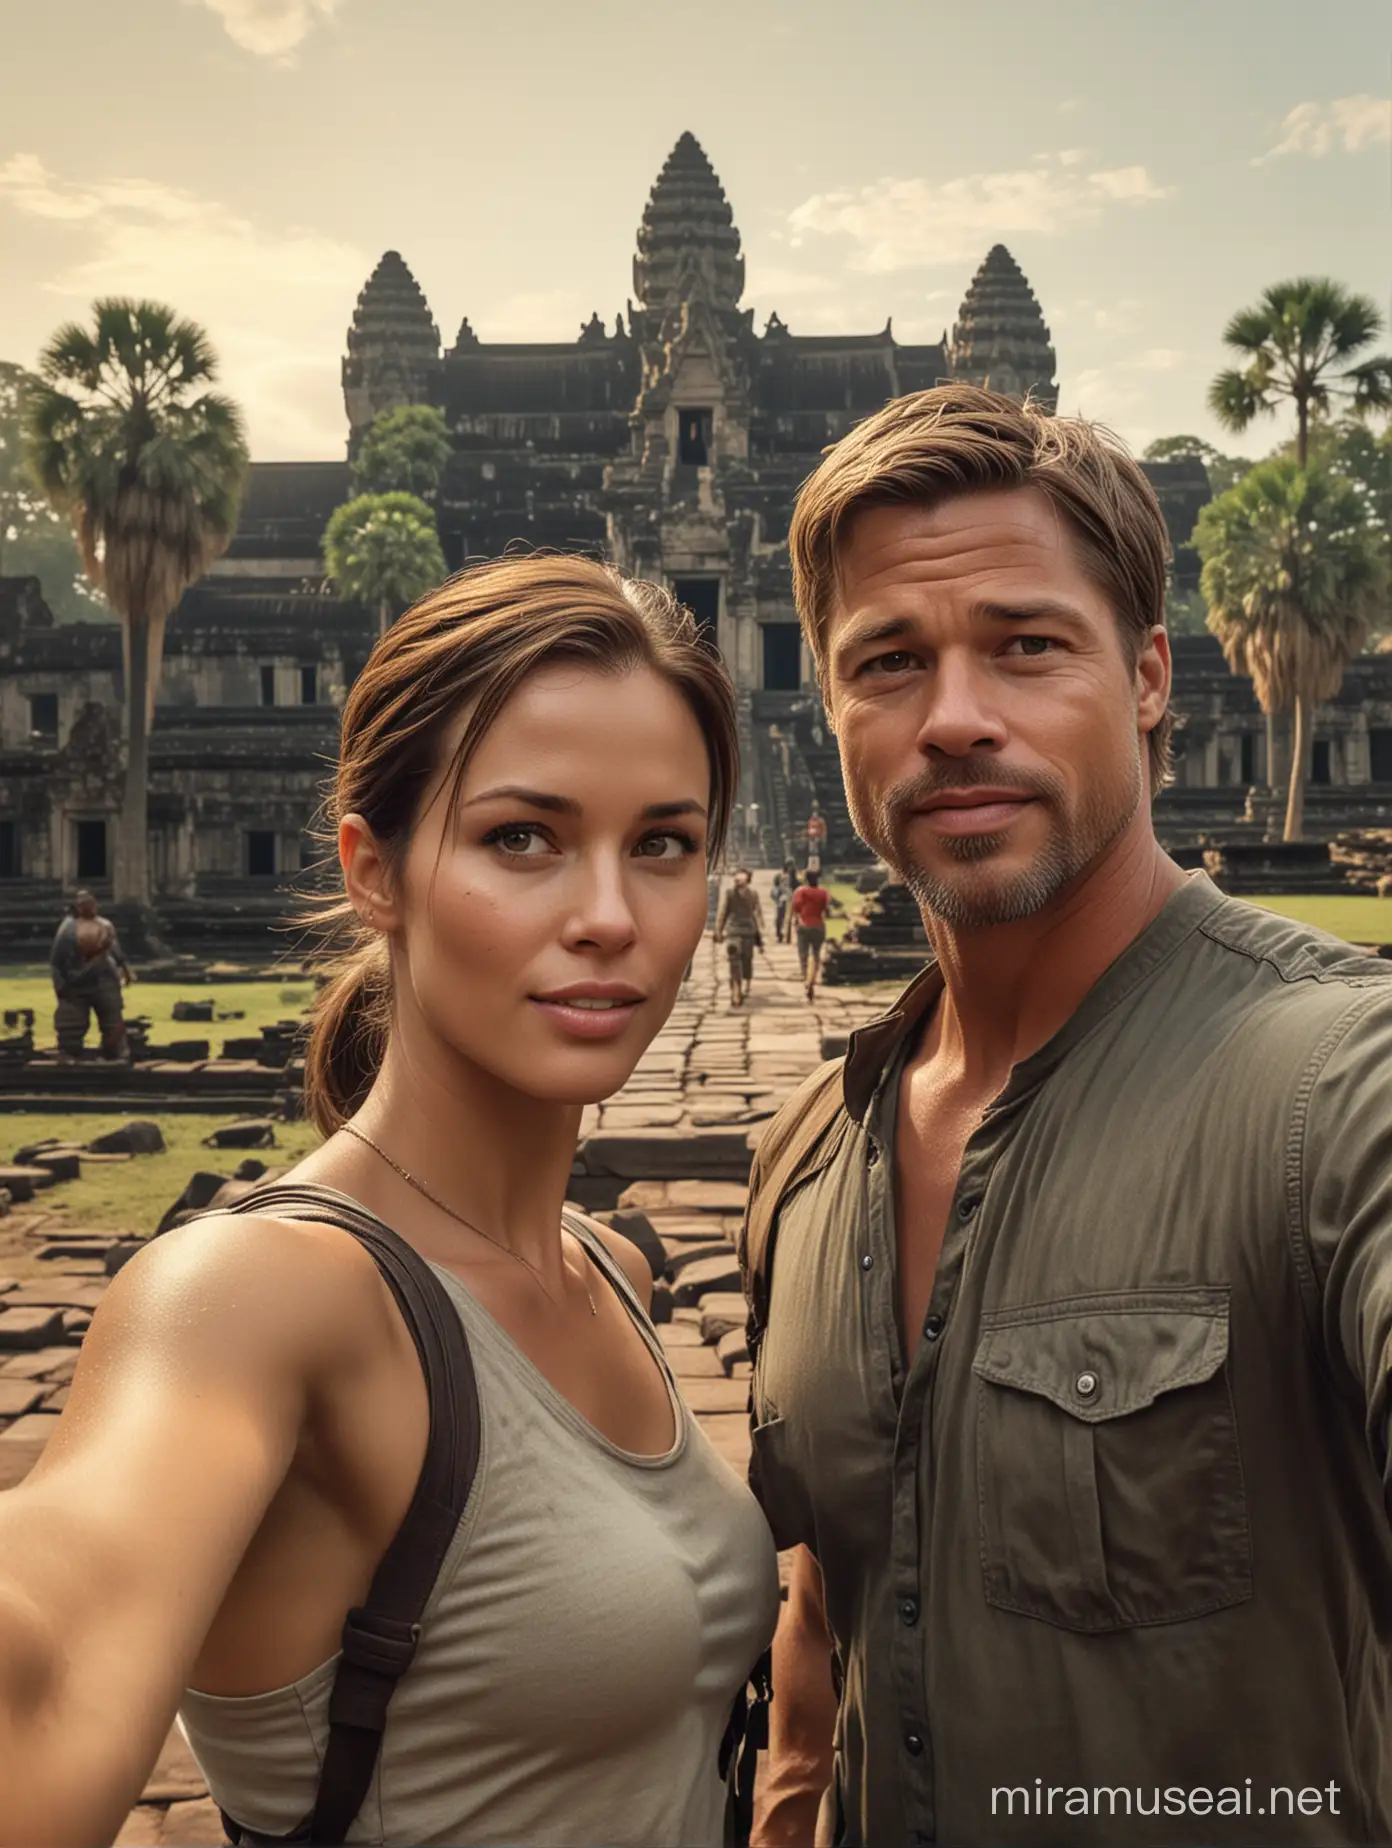 Create a highly detailed and sharp image of Lara Croft and Brad Pitt taking a selfie in front of Angkor Wat temple. 